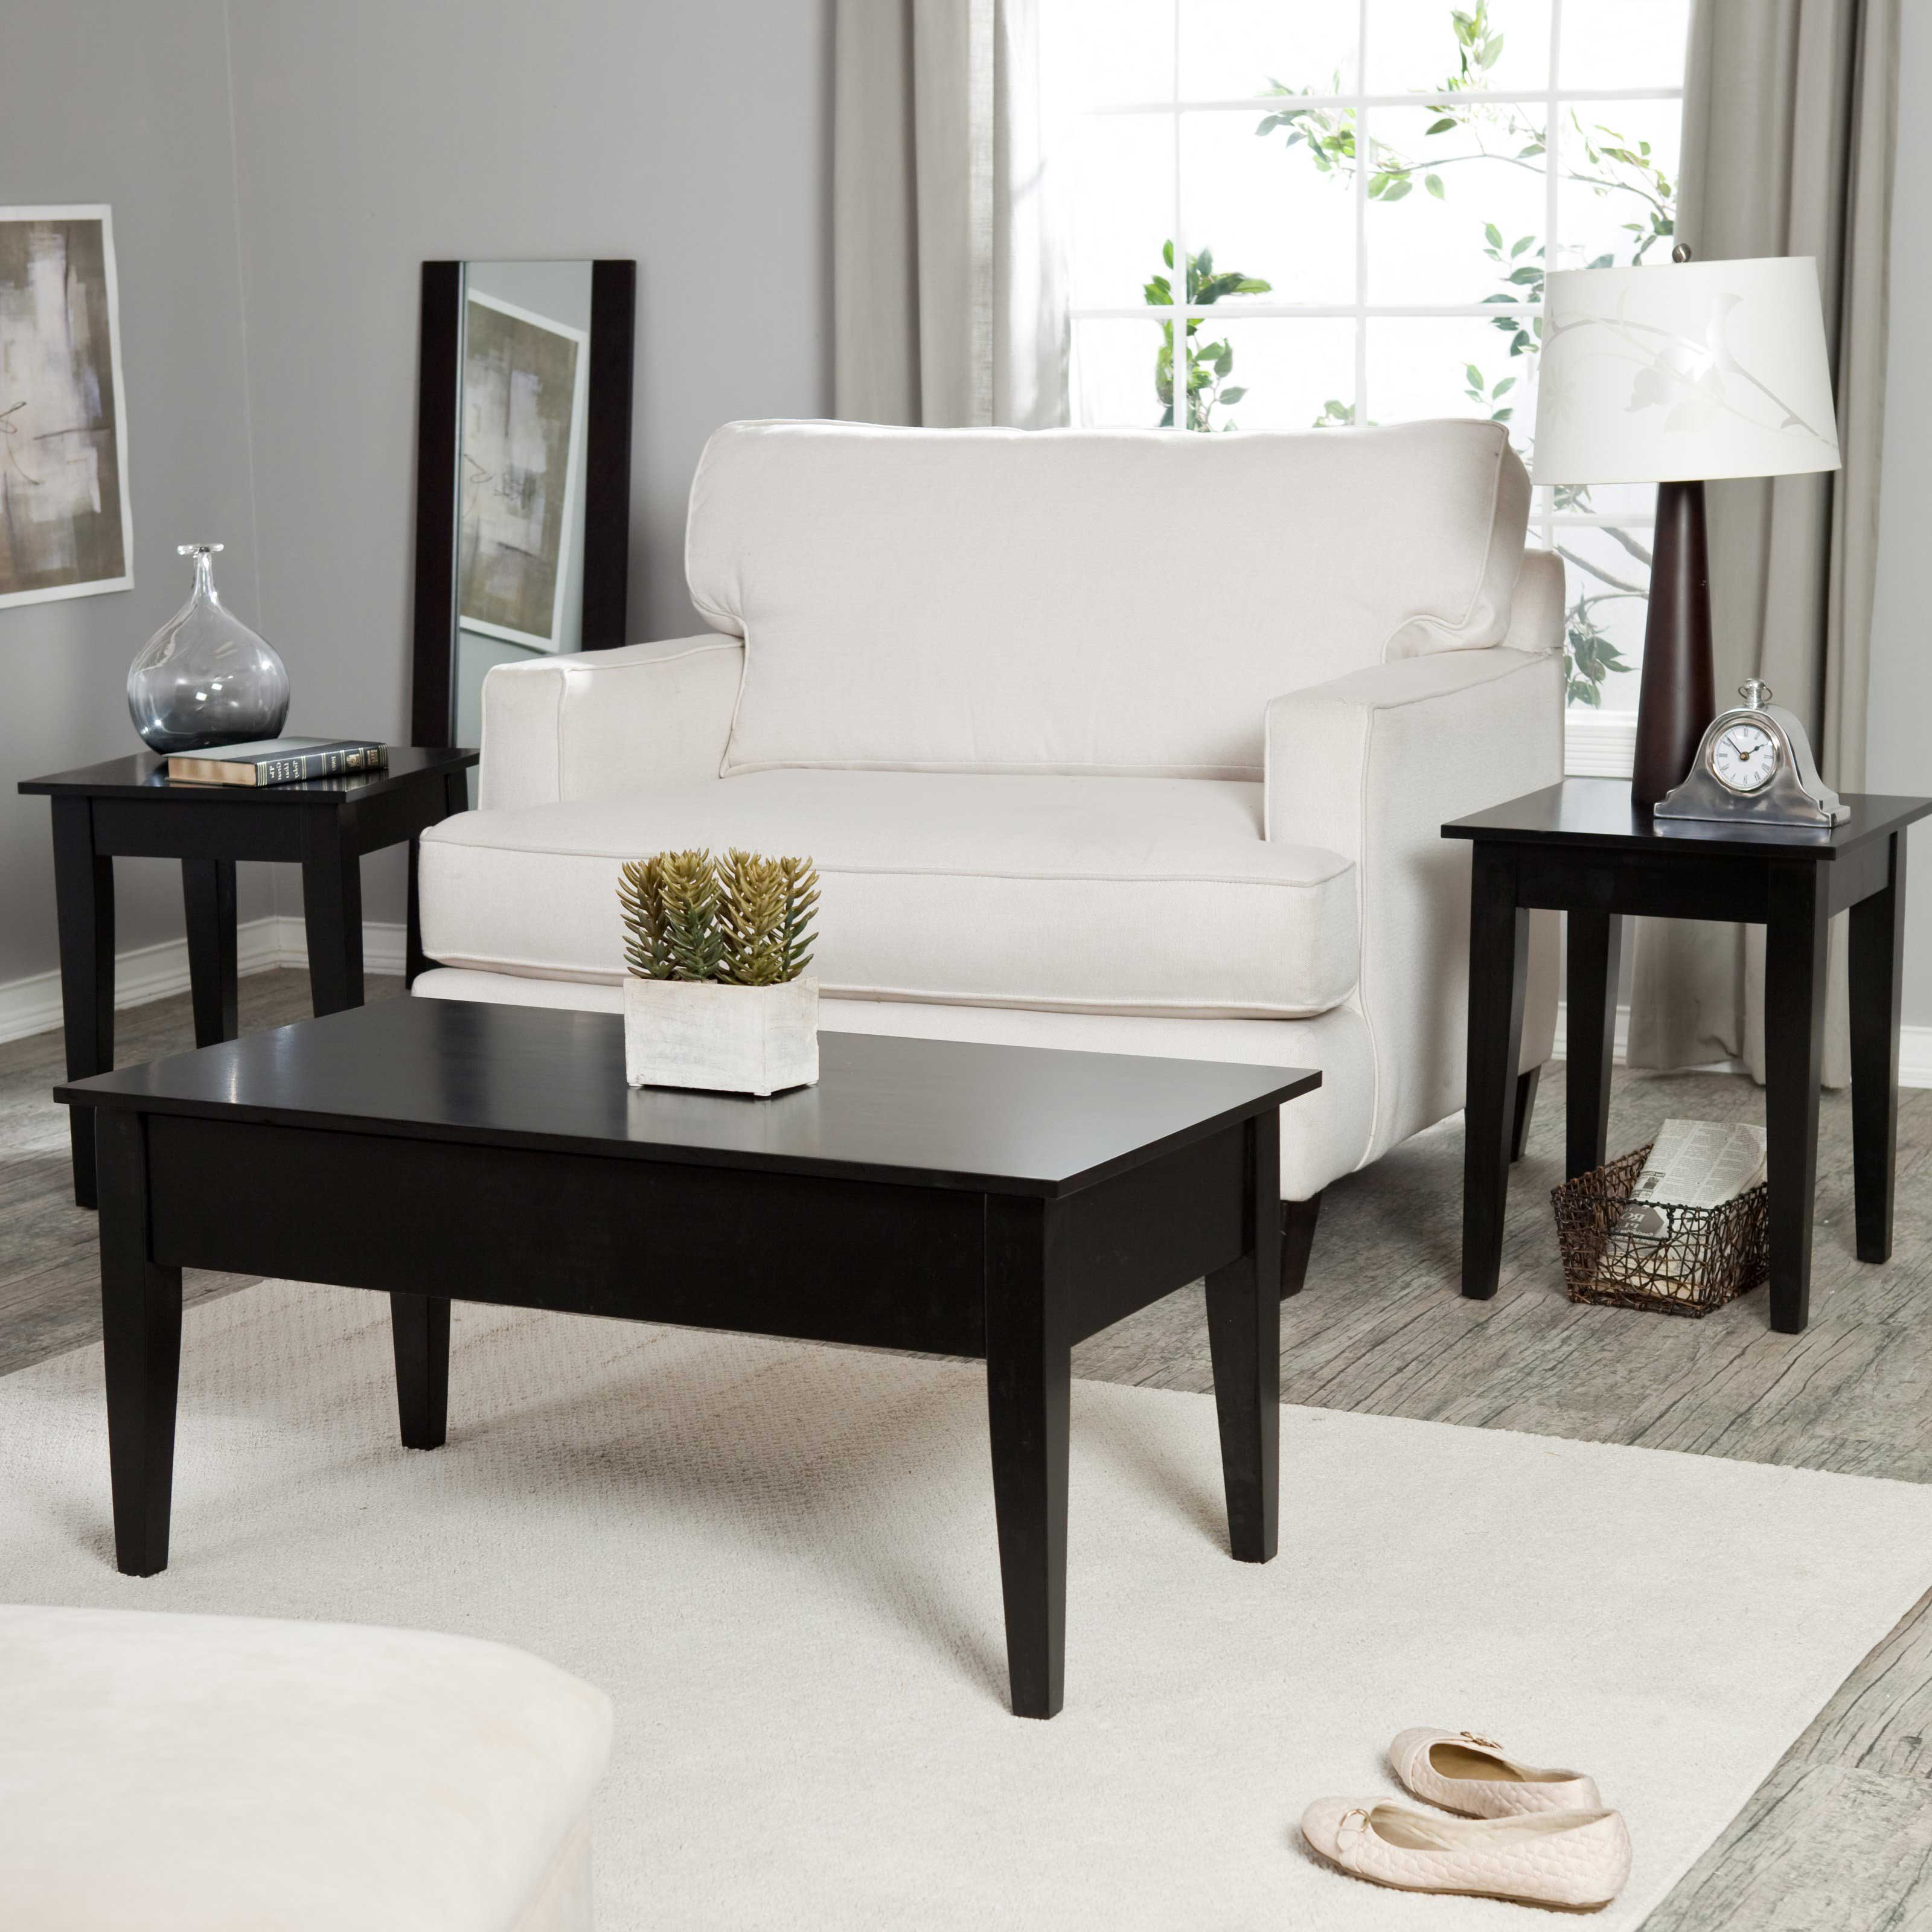 black coffee and end table sets 23